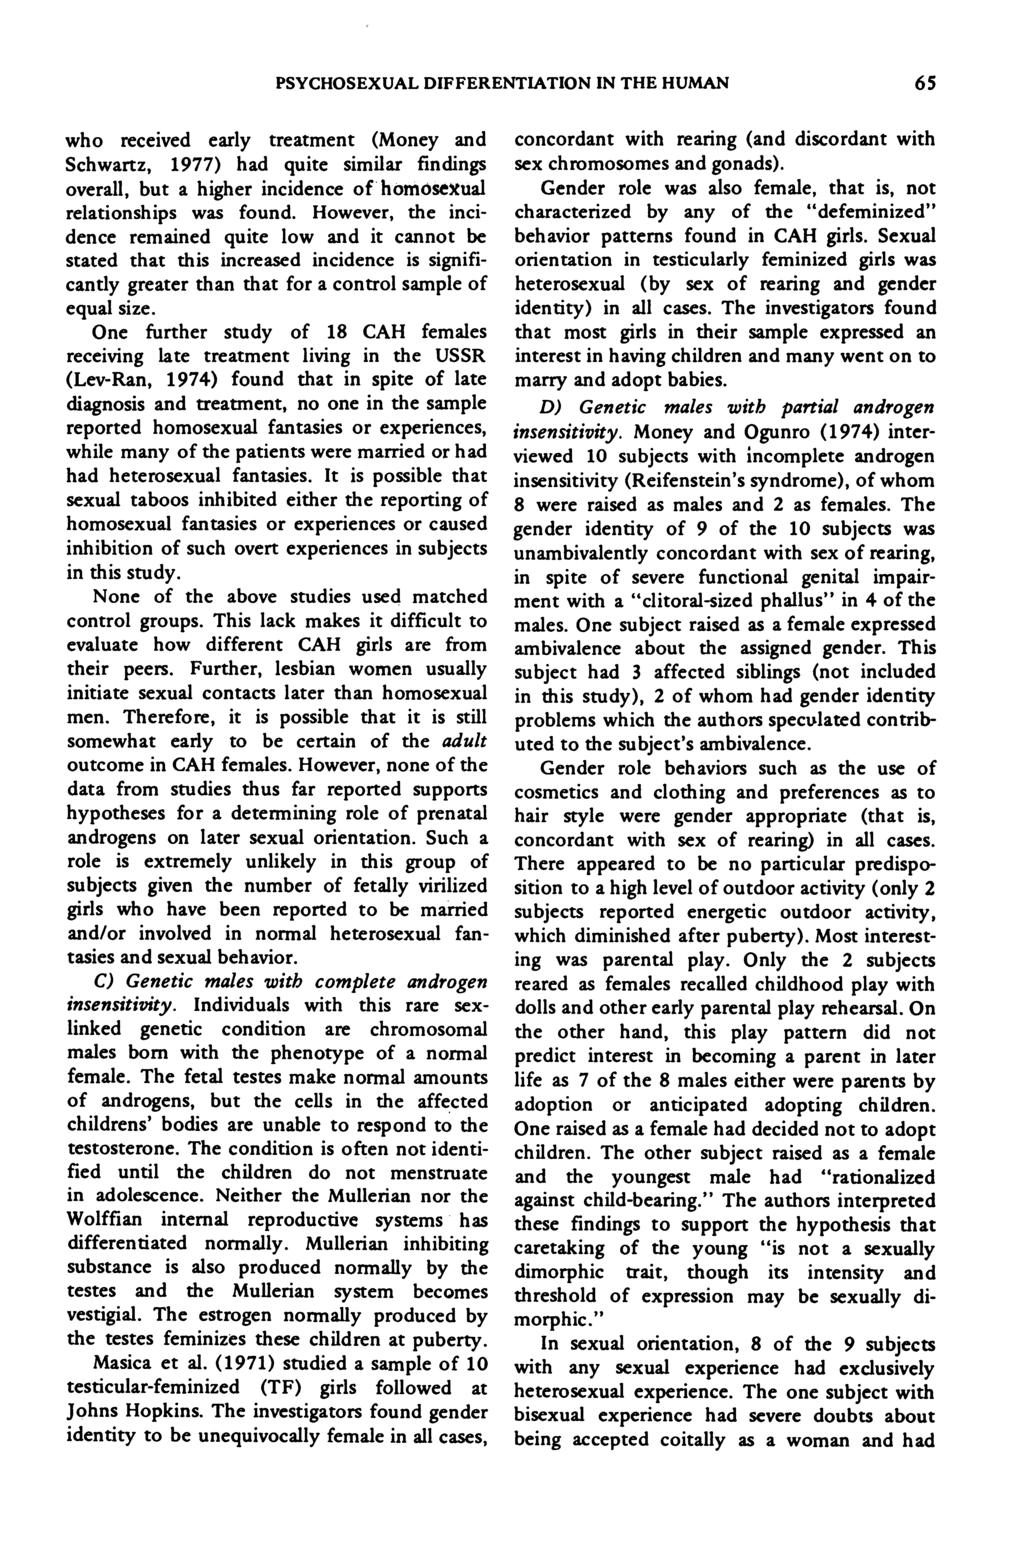 PSYCHOSEXUAL DIFFERENTIATION IN THE HUMAN 65 who received early treatment (Money and Schwartz, 1977) had quite similar findings overall, but a higher incidence of homosexual relationships was found.